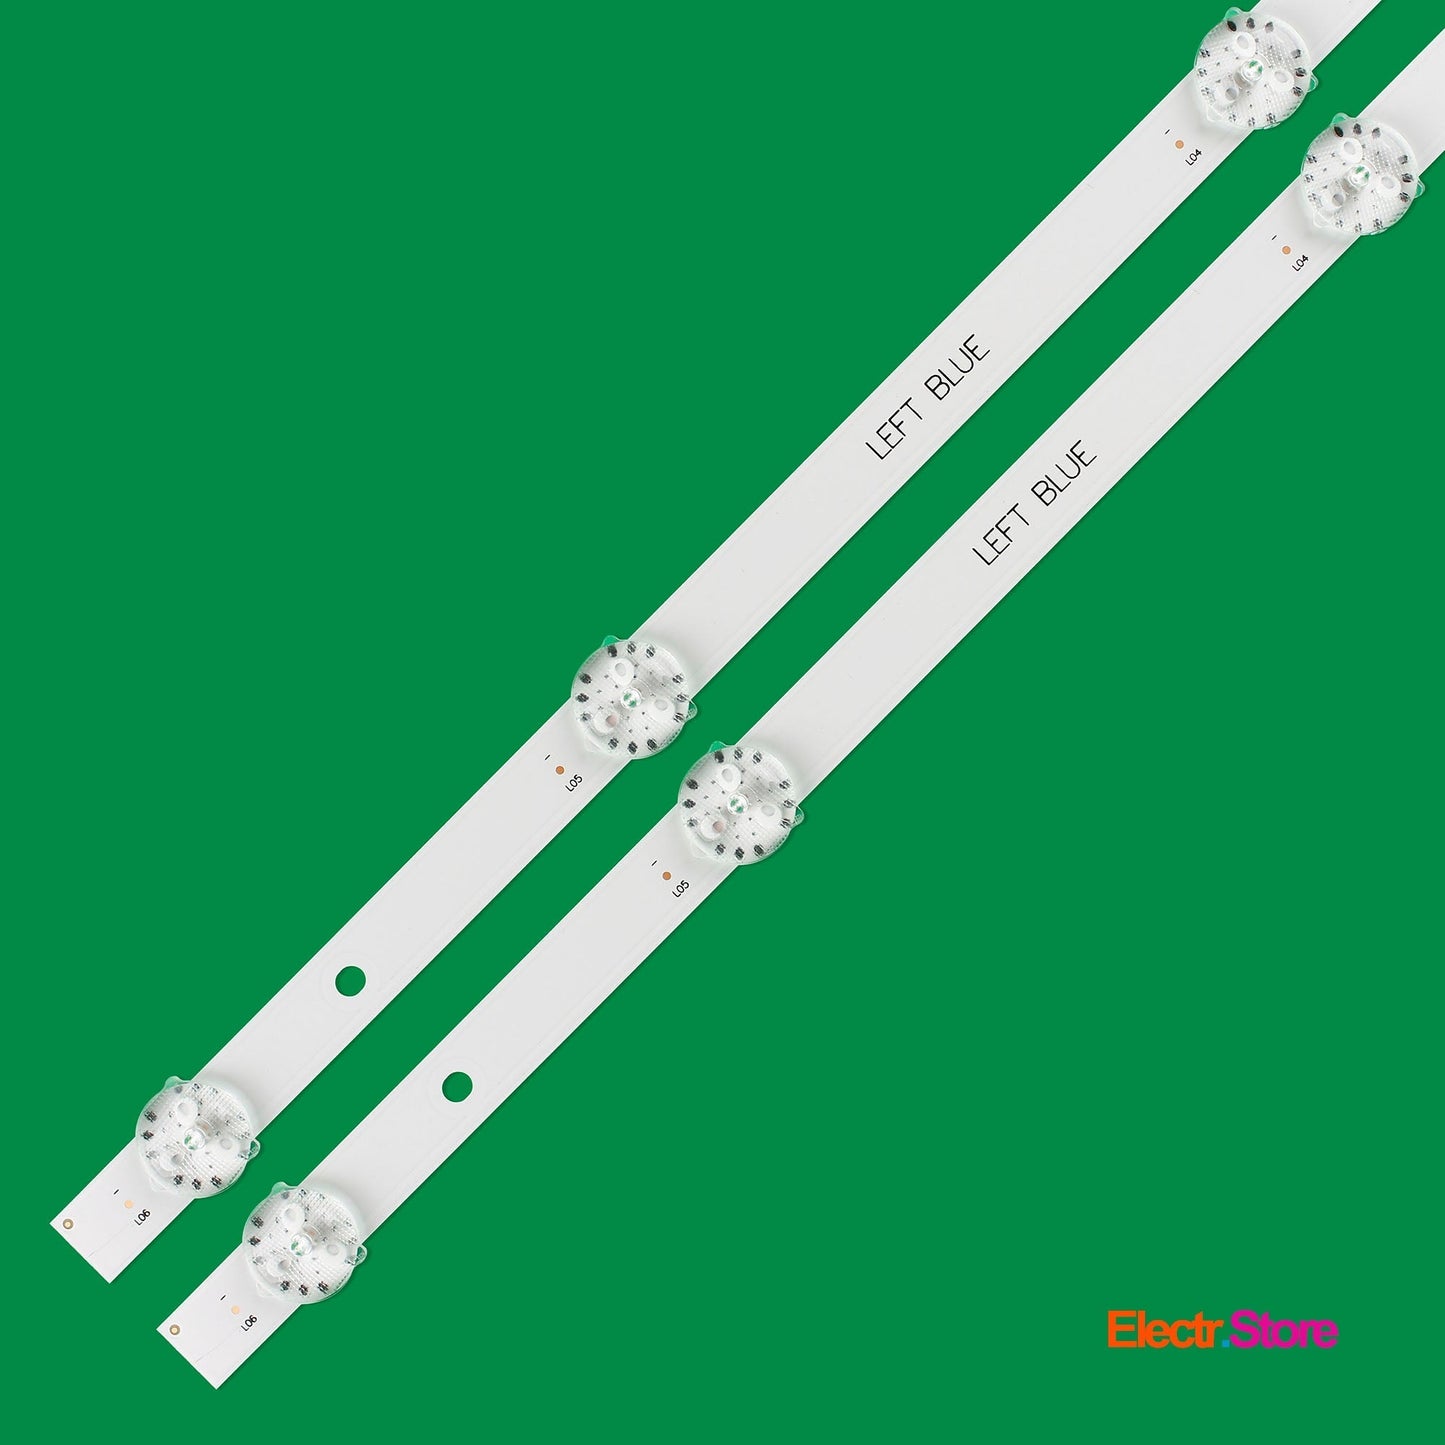 LED Backlight Strip Kits, JL.D32061330-057GS-M, JL.D32061330-004AS-M, 4C-LB320T-JF3/JF4 (2 pcs/kit), for TV 32" TCL: H32B3913 32" JL.D32061330-057GS-M LED Backlights Multi Others TCL THOMSON Whaley Electr.Store